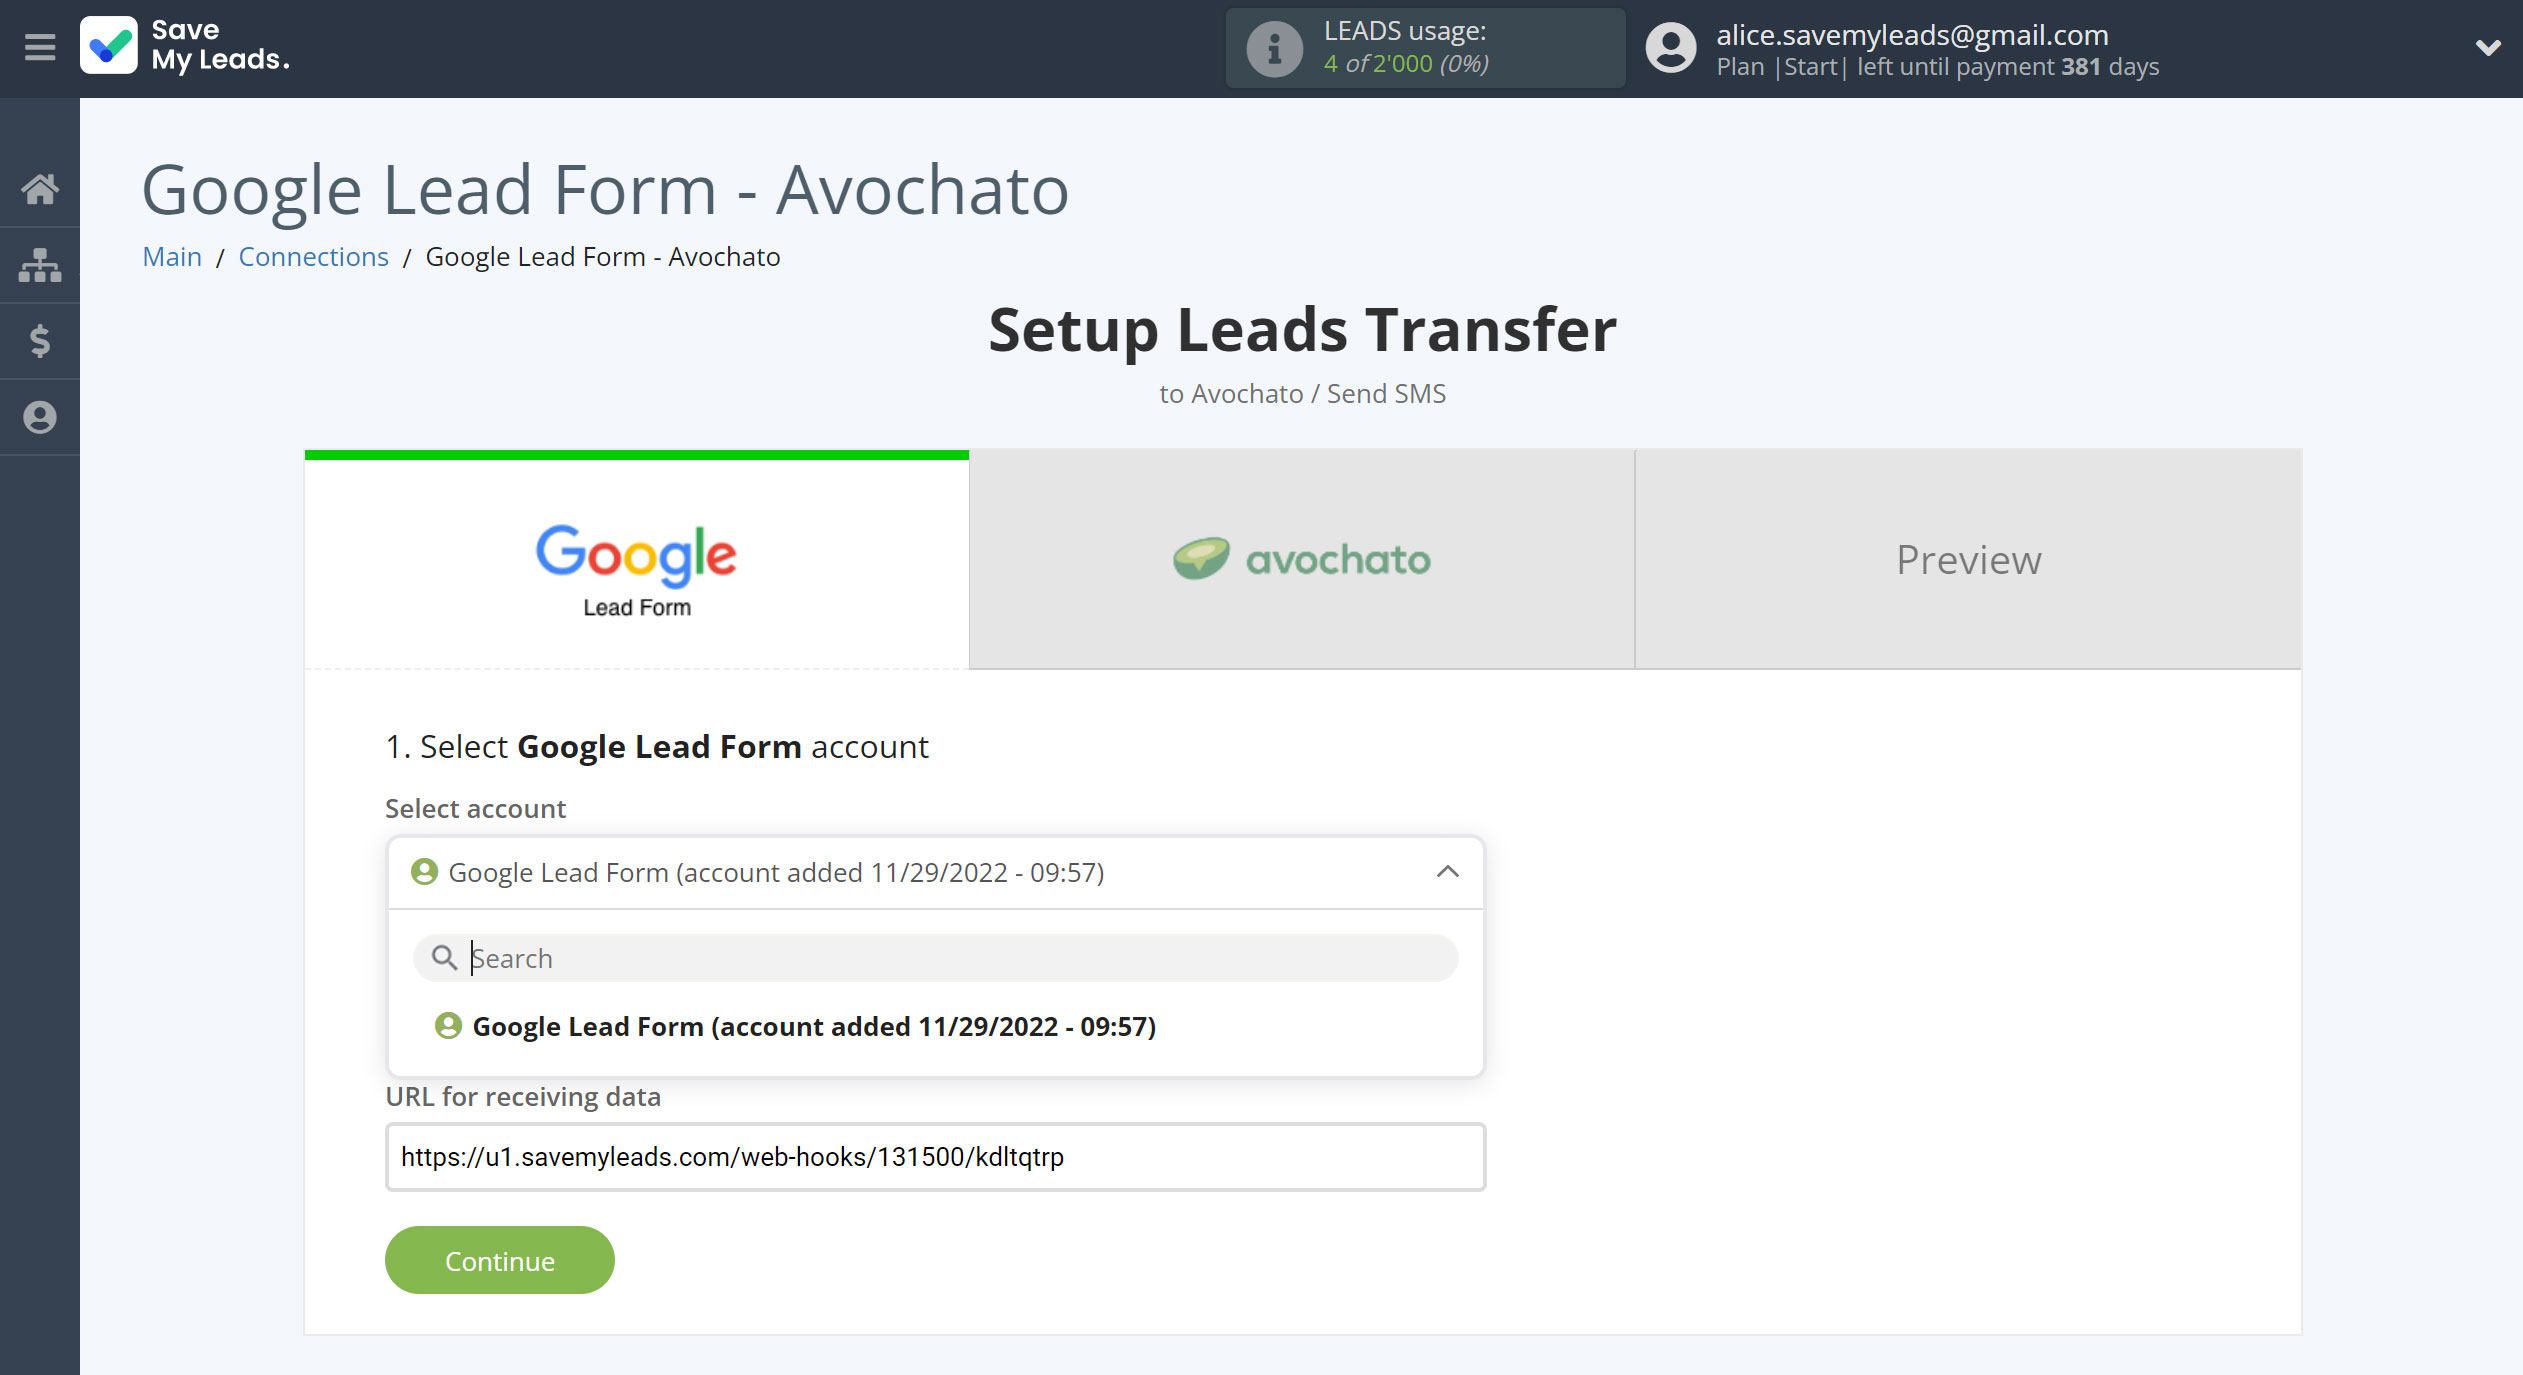 How to Connect Google Lead Form with Avochato | Data Source account selection